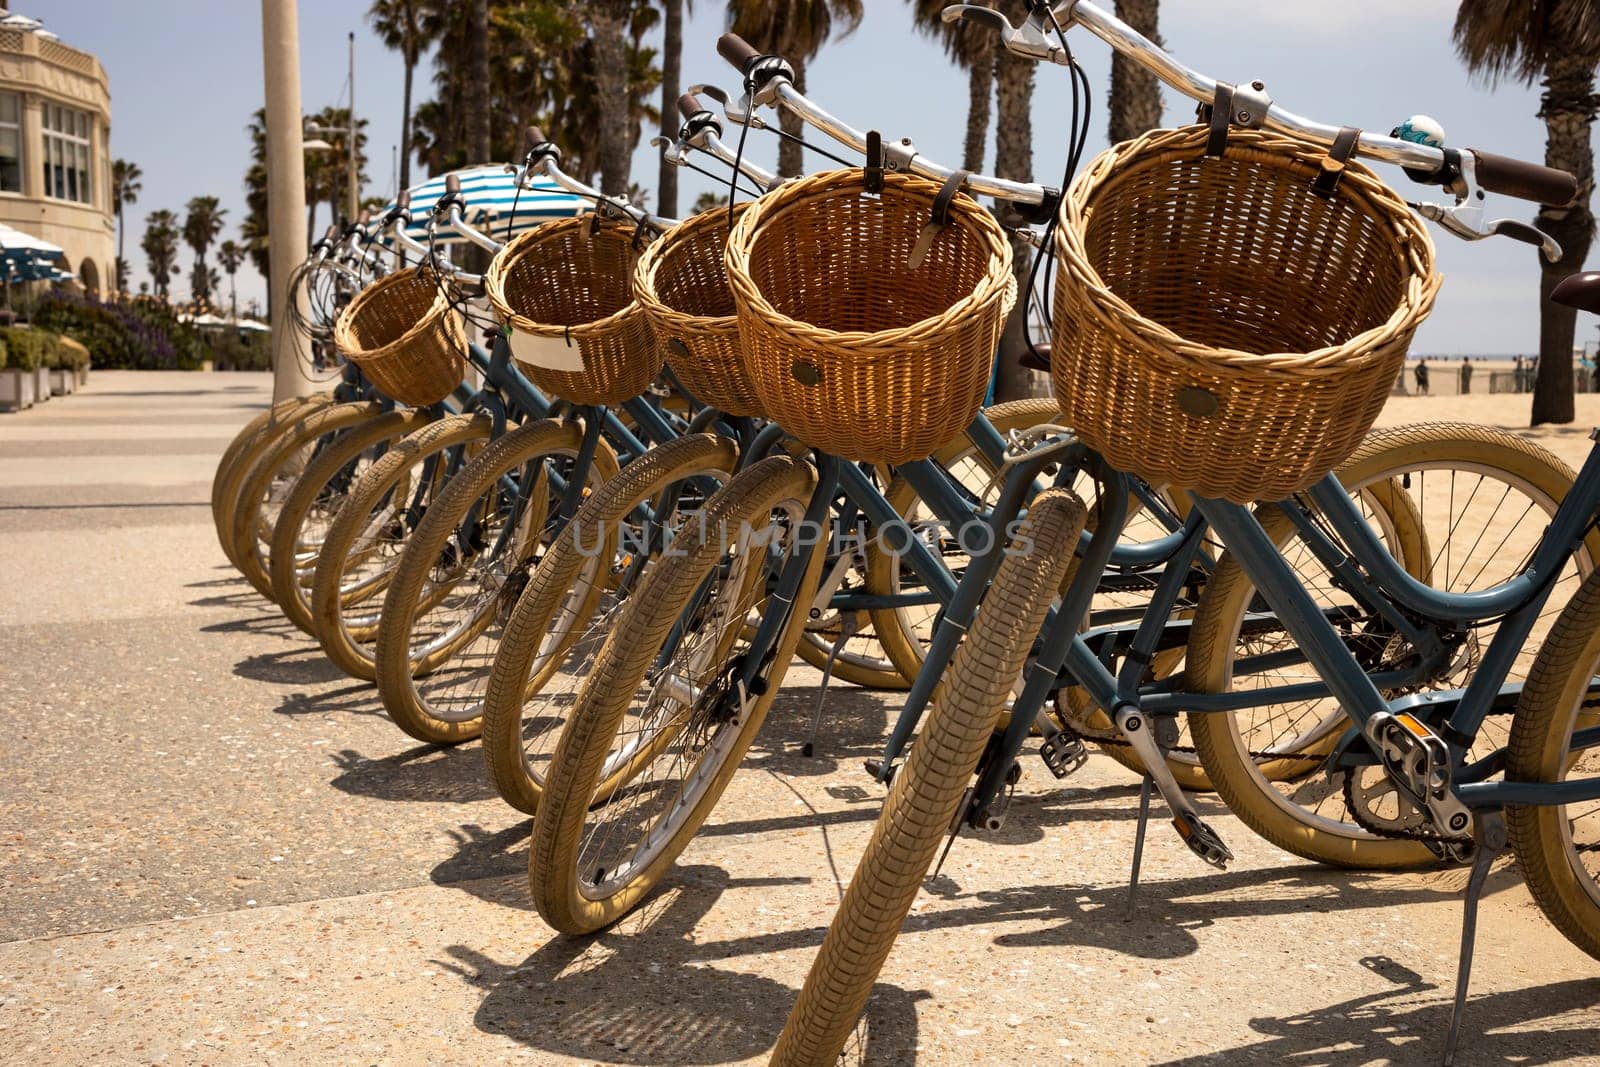 Many Bicycles with Baskets on Beach, Palm Trees and Blue Sky On Background. Bicycle Day. Travel Destination, Vacation. Eco Transportation, Recreation. Horizontal Plane